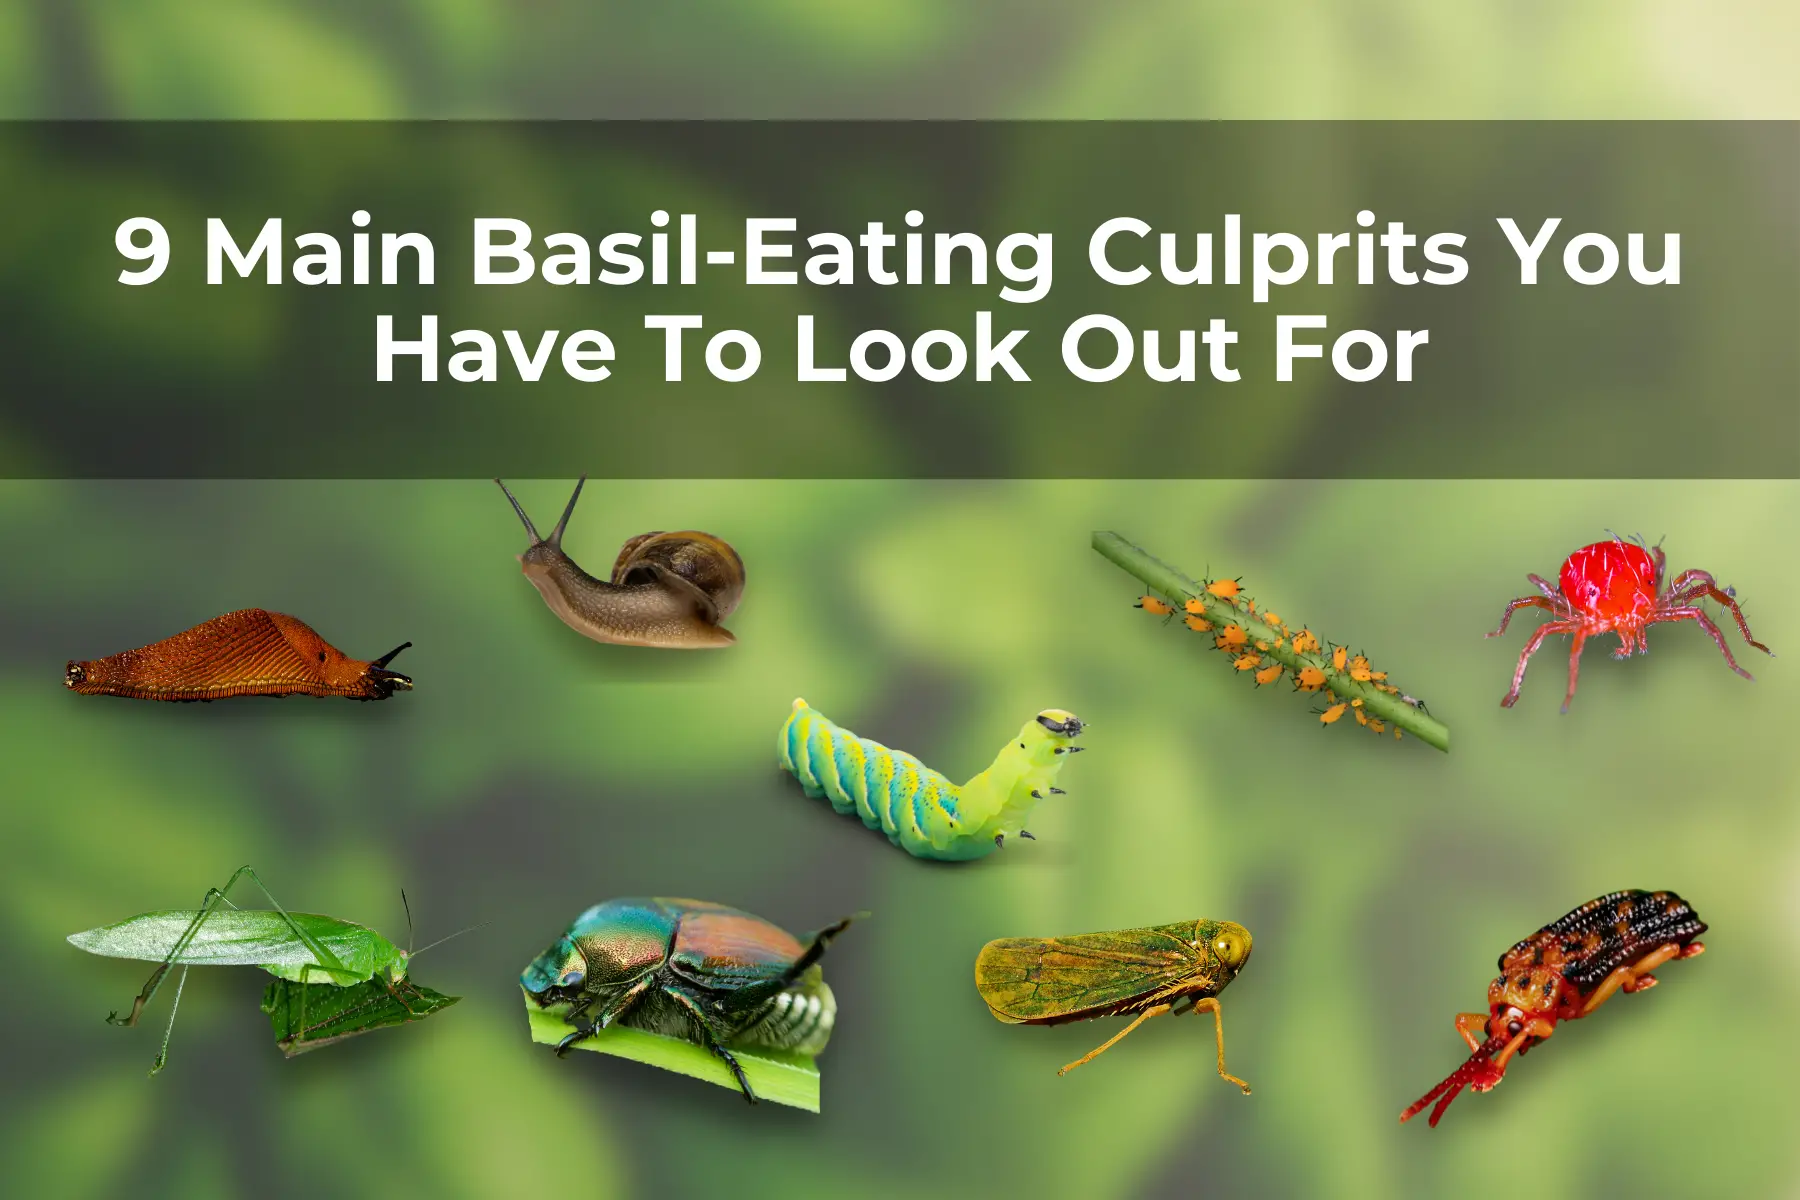 9 Main Basil-Eating Culprits You Have To Look Out For